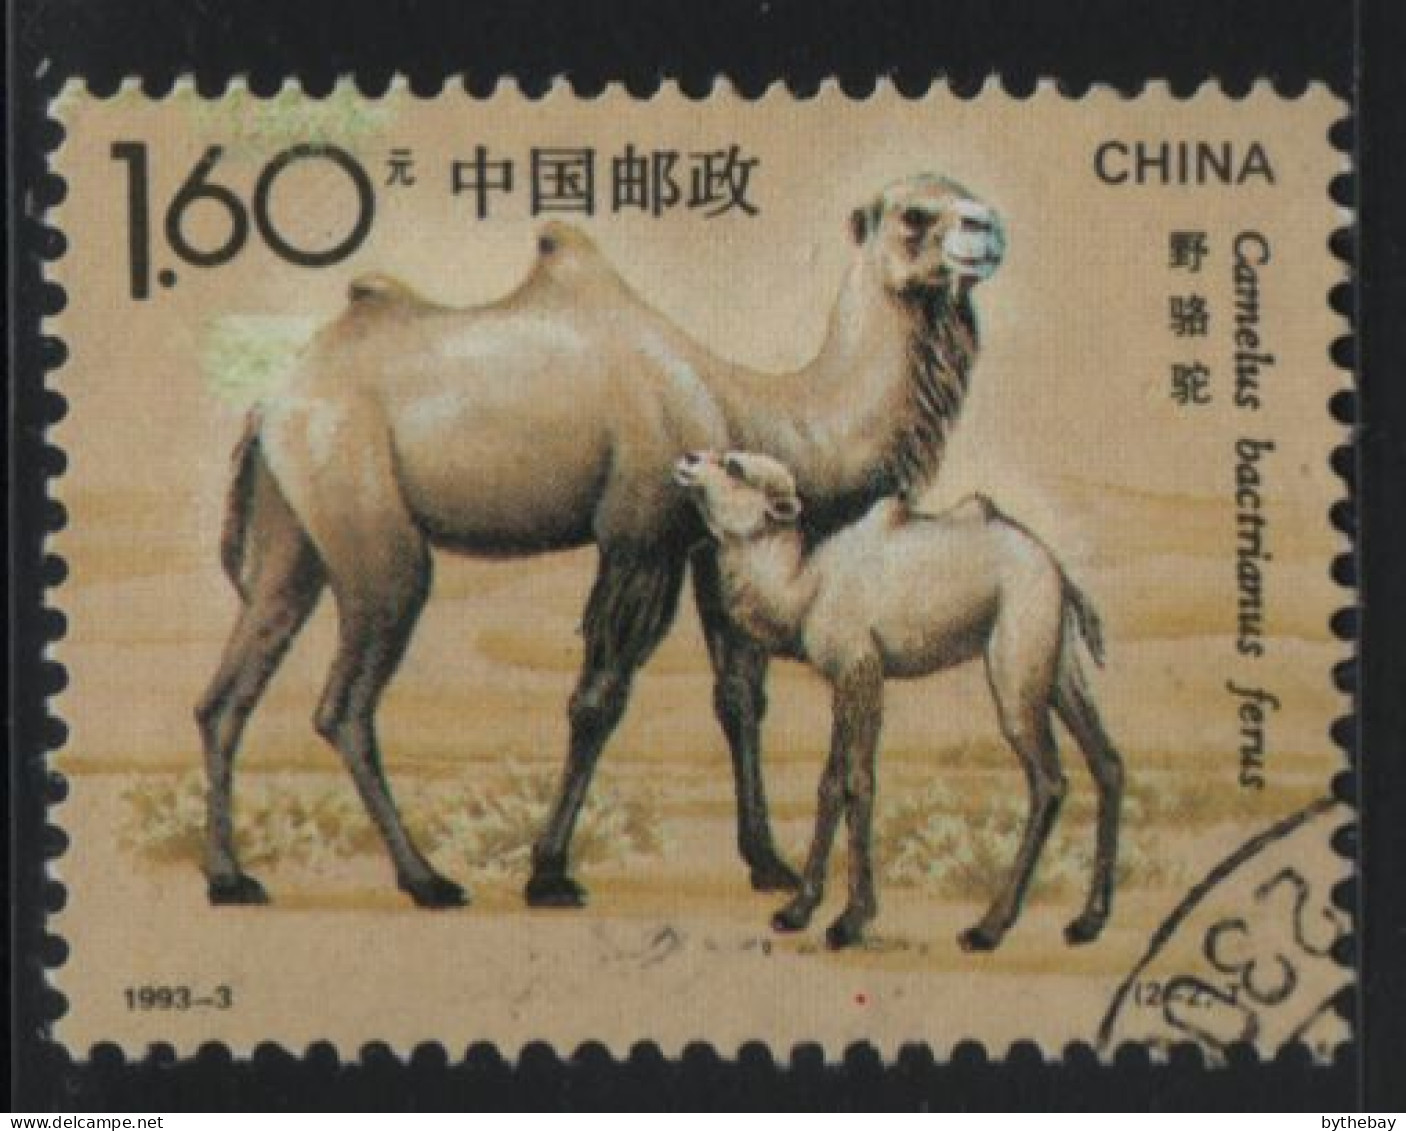 China People's Republic 1993 Used Sc 2434 $1.60 Camels - Used Stamps